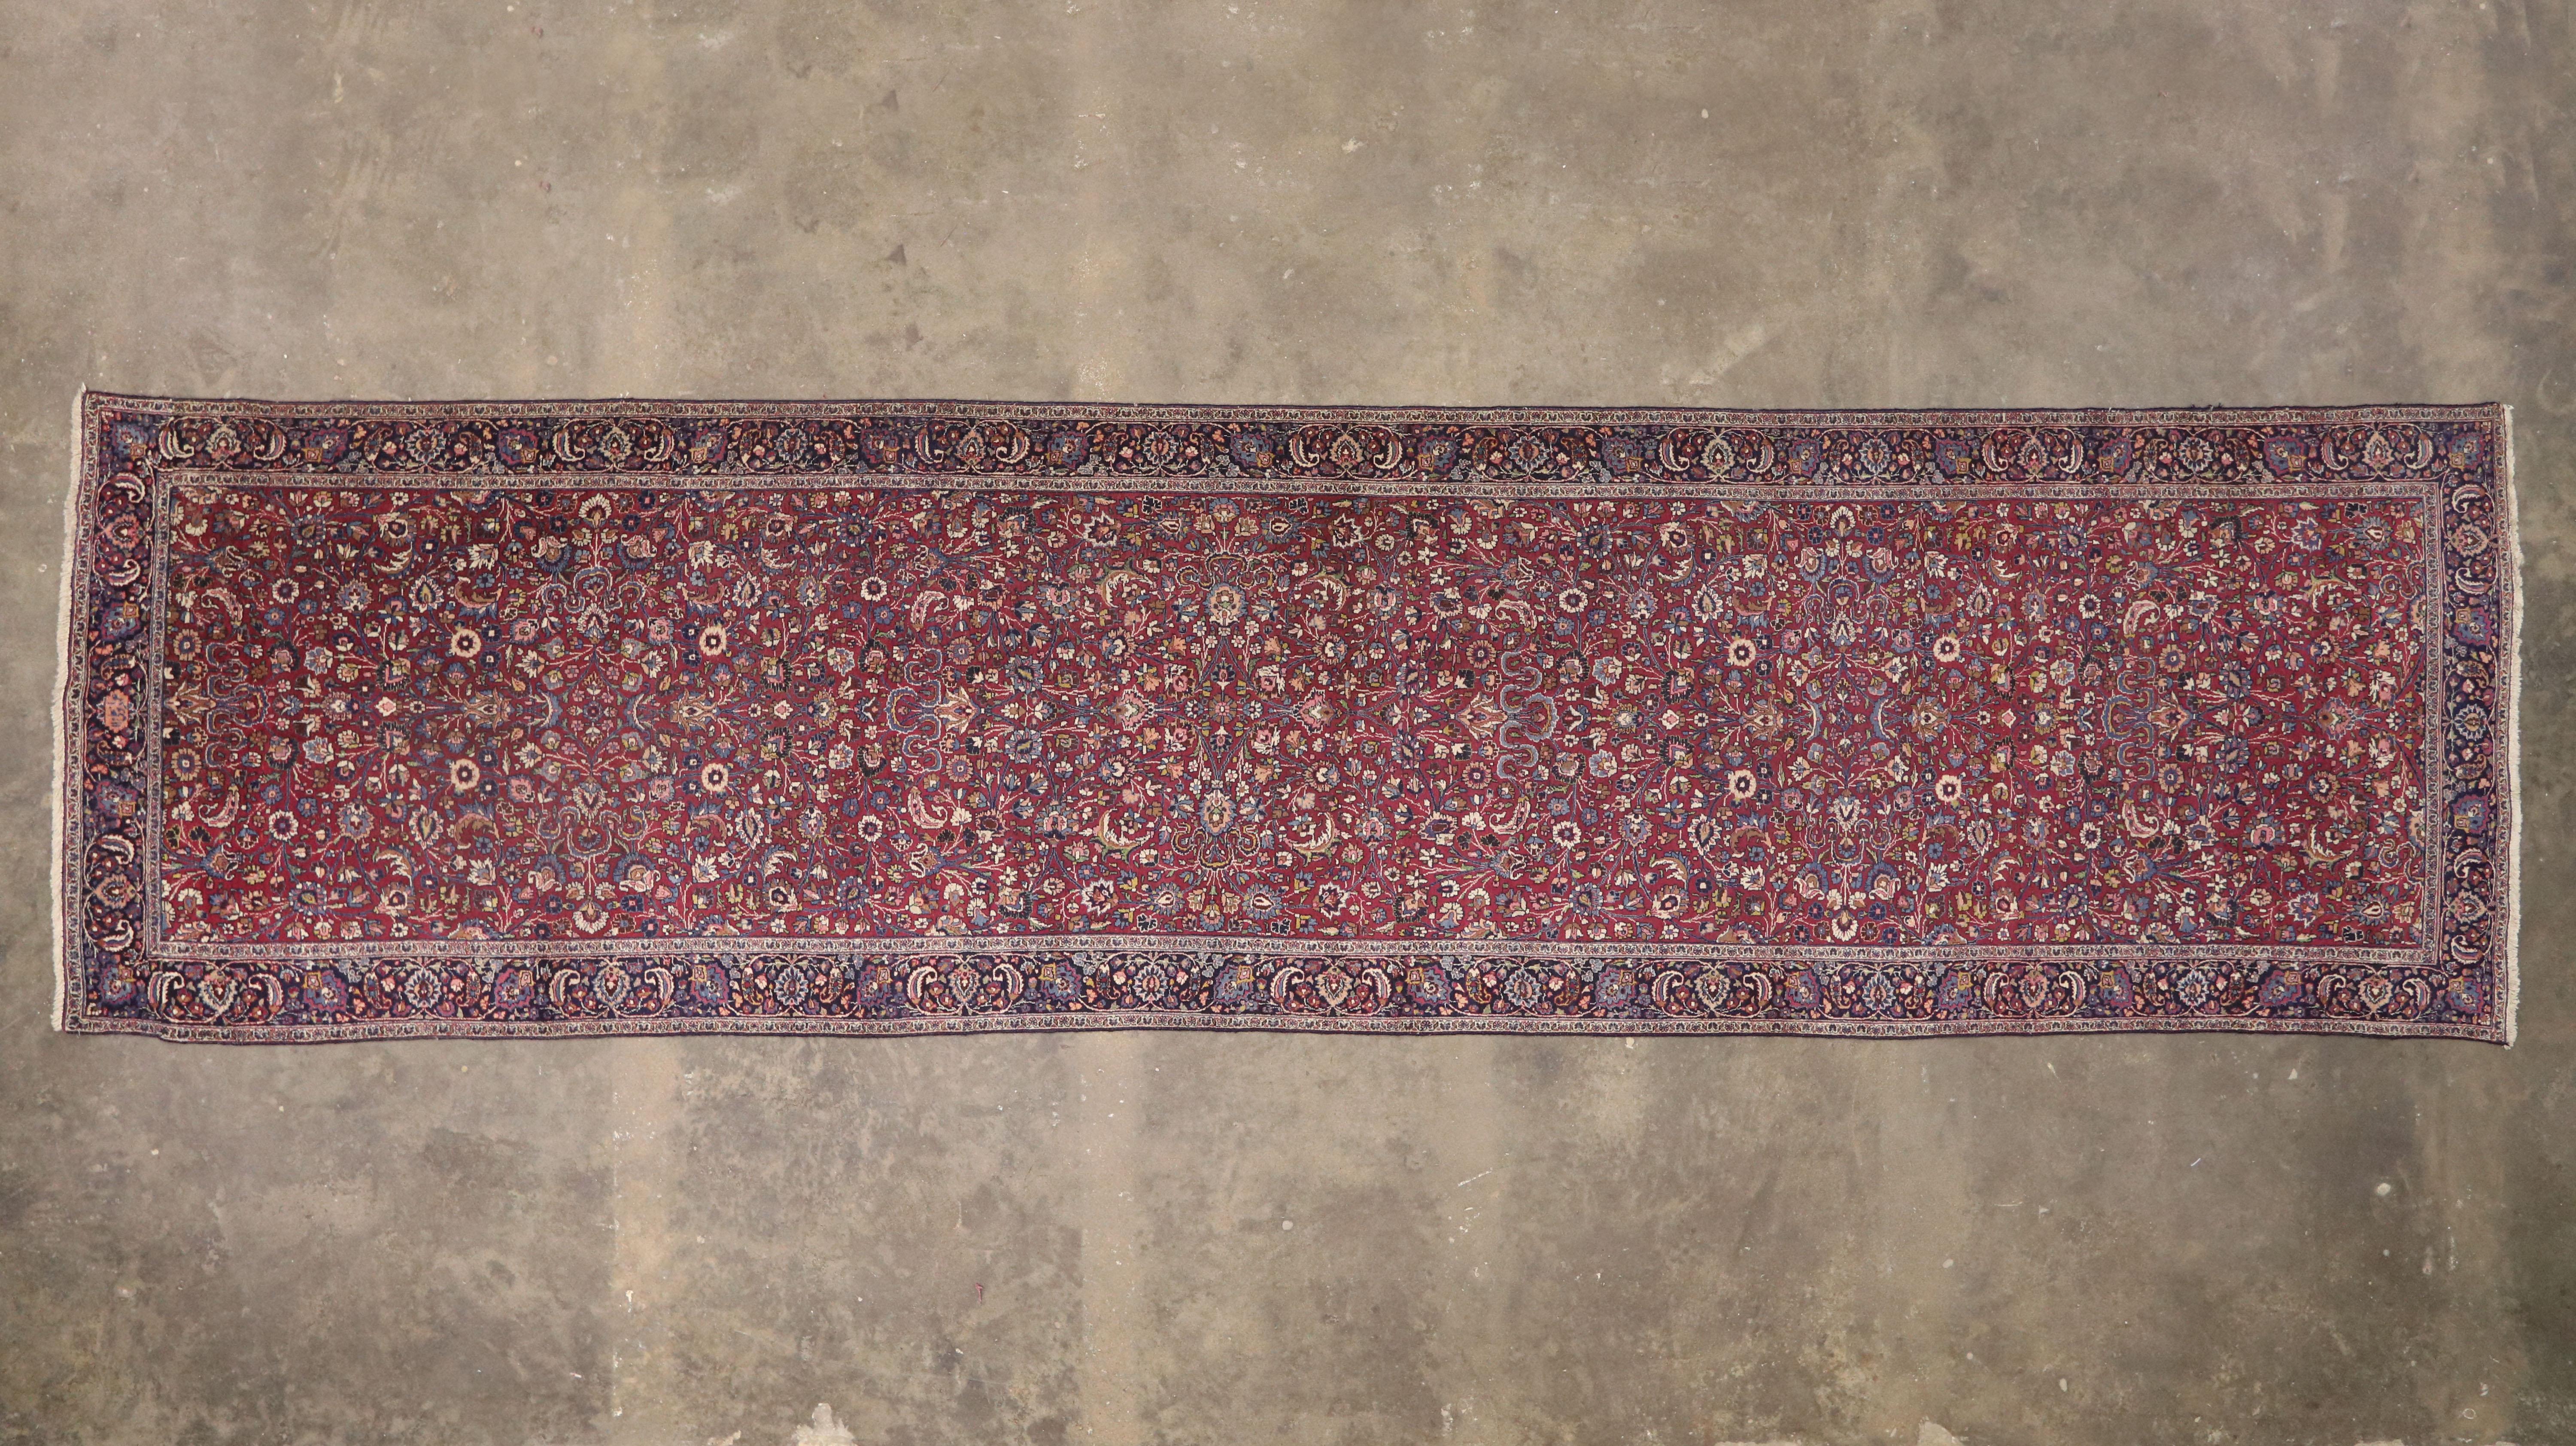 19th Century Antique Persian Mashhad Runner with Old World Style, Extra-Long Hallway Runner For Sale